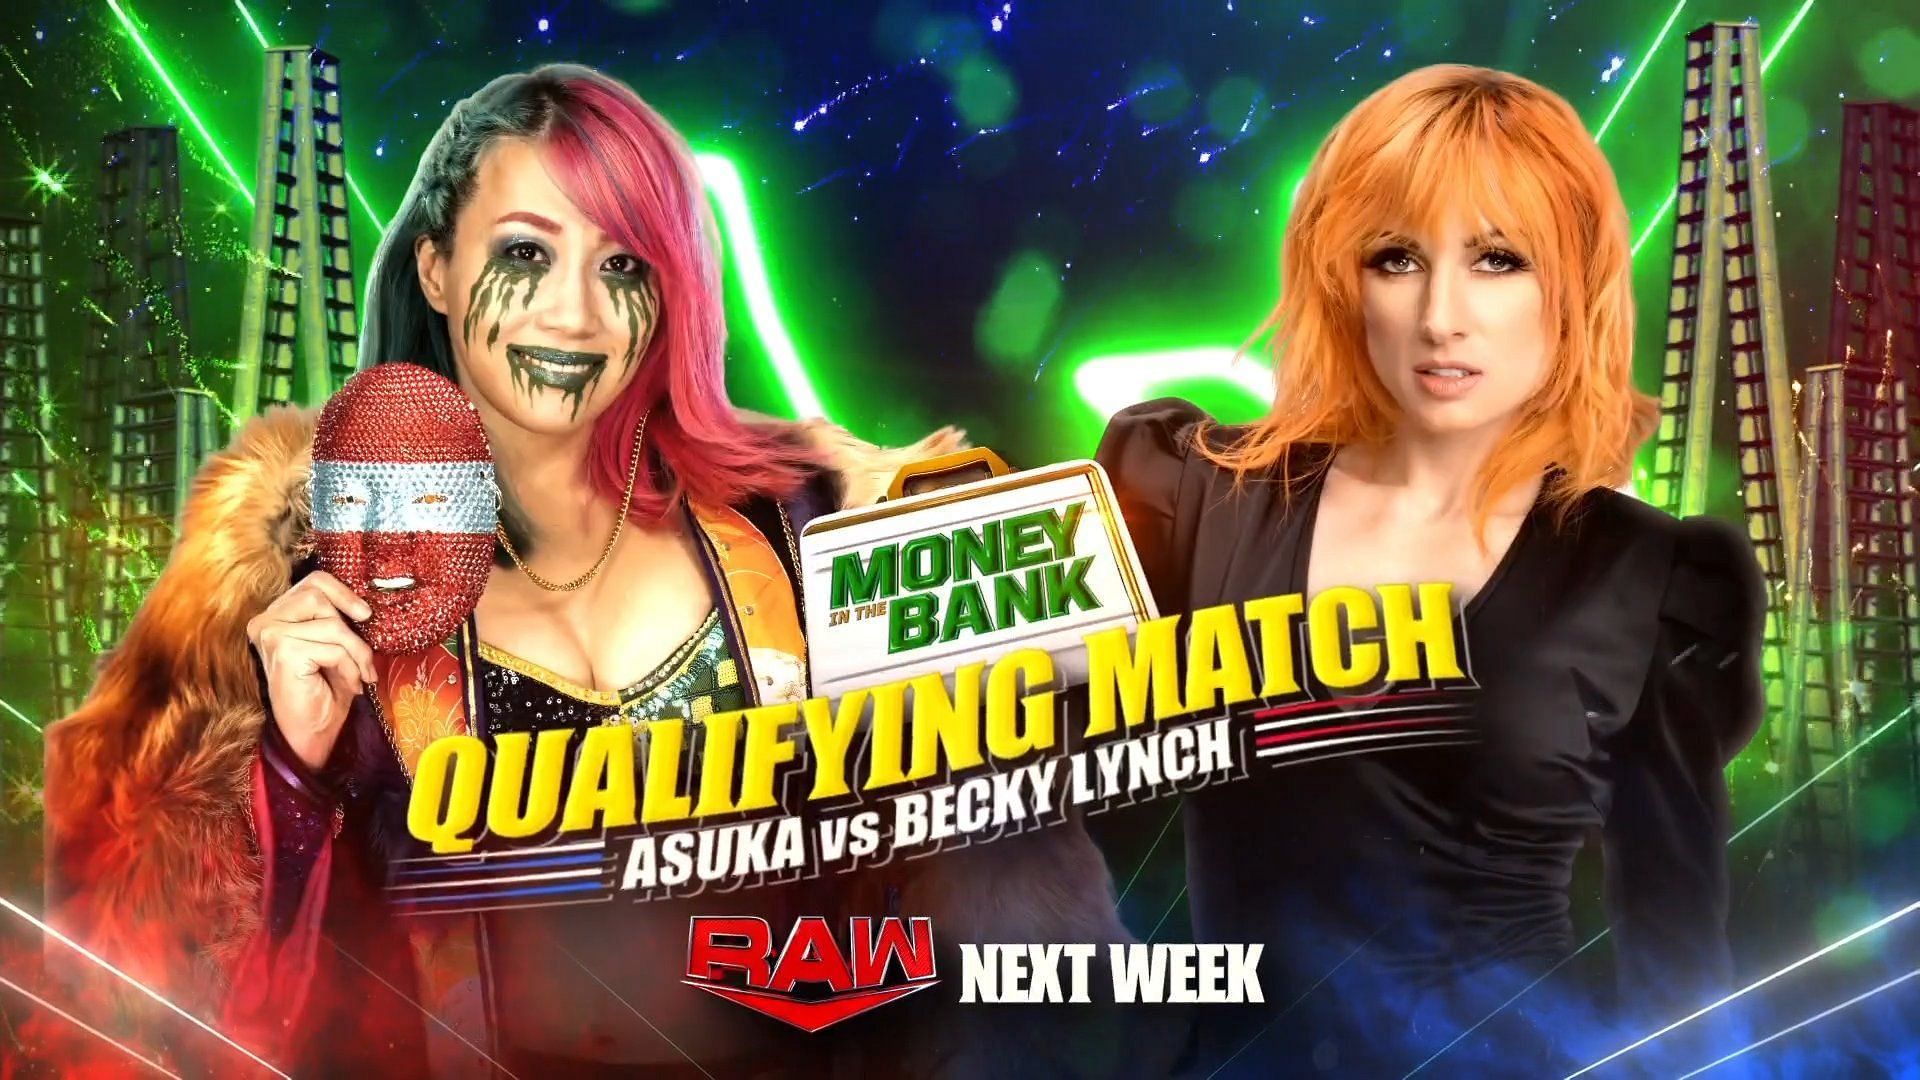 Asuka vs. Becky Lynch will take place next week on RAW